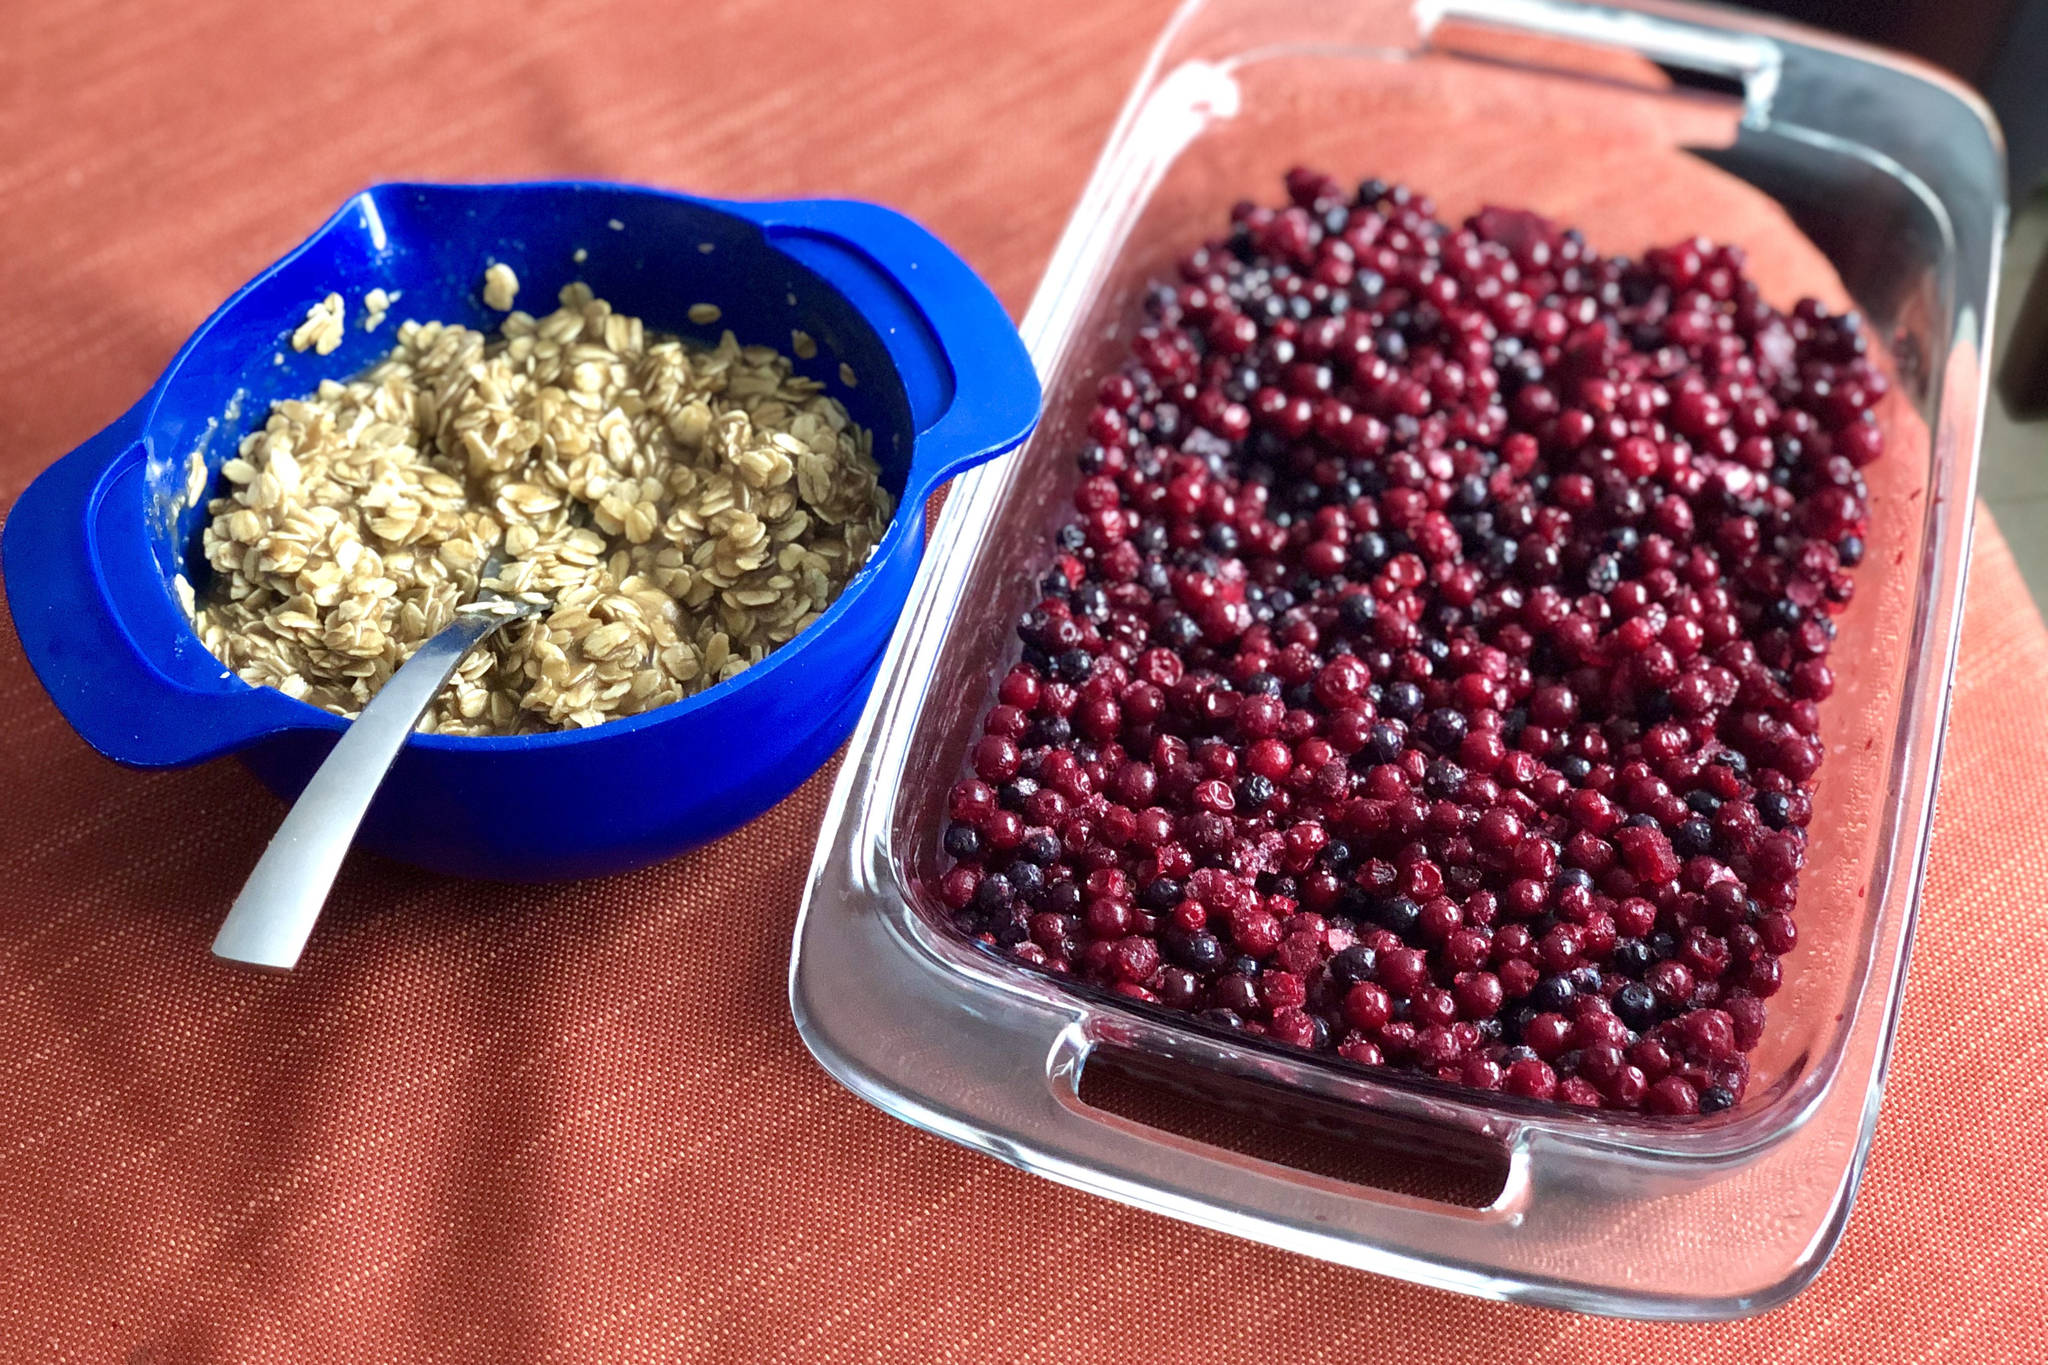 Getting my ingredients ready for blueberry crumble, where the berries can be prepared right in the pan and the topping in a small bowl, photographed on Tuesday, Feb. 16, 2021, in Anchorage, Alaska (Photo by Victoria Petersen/Peninsula Clarion)